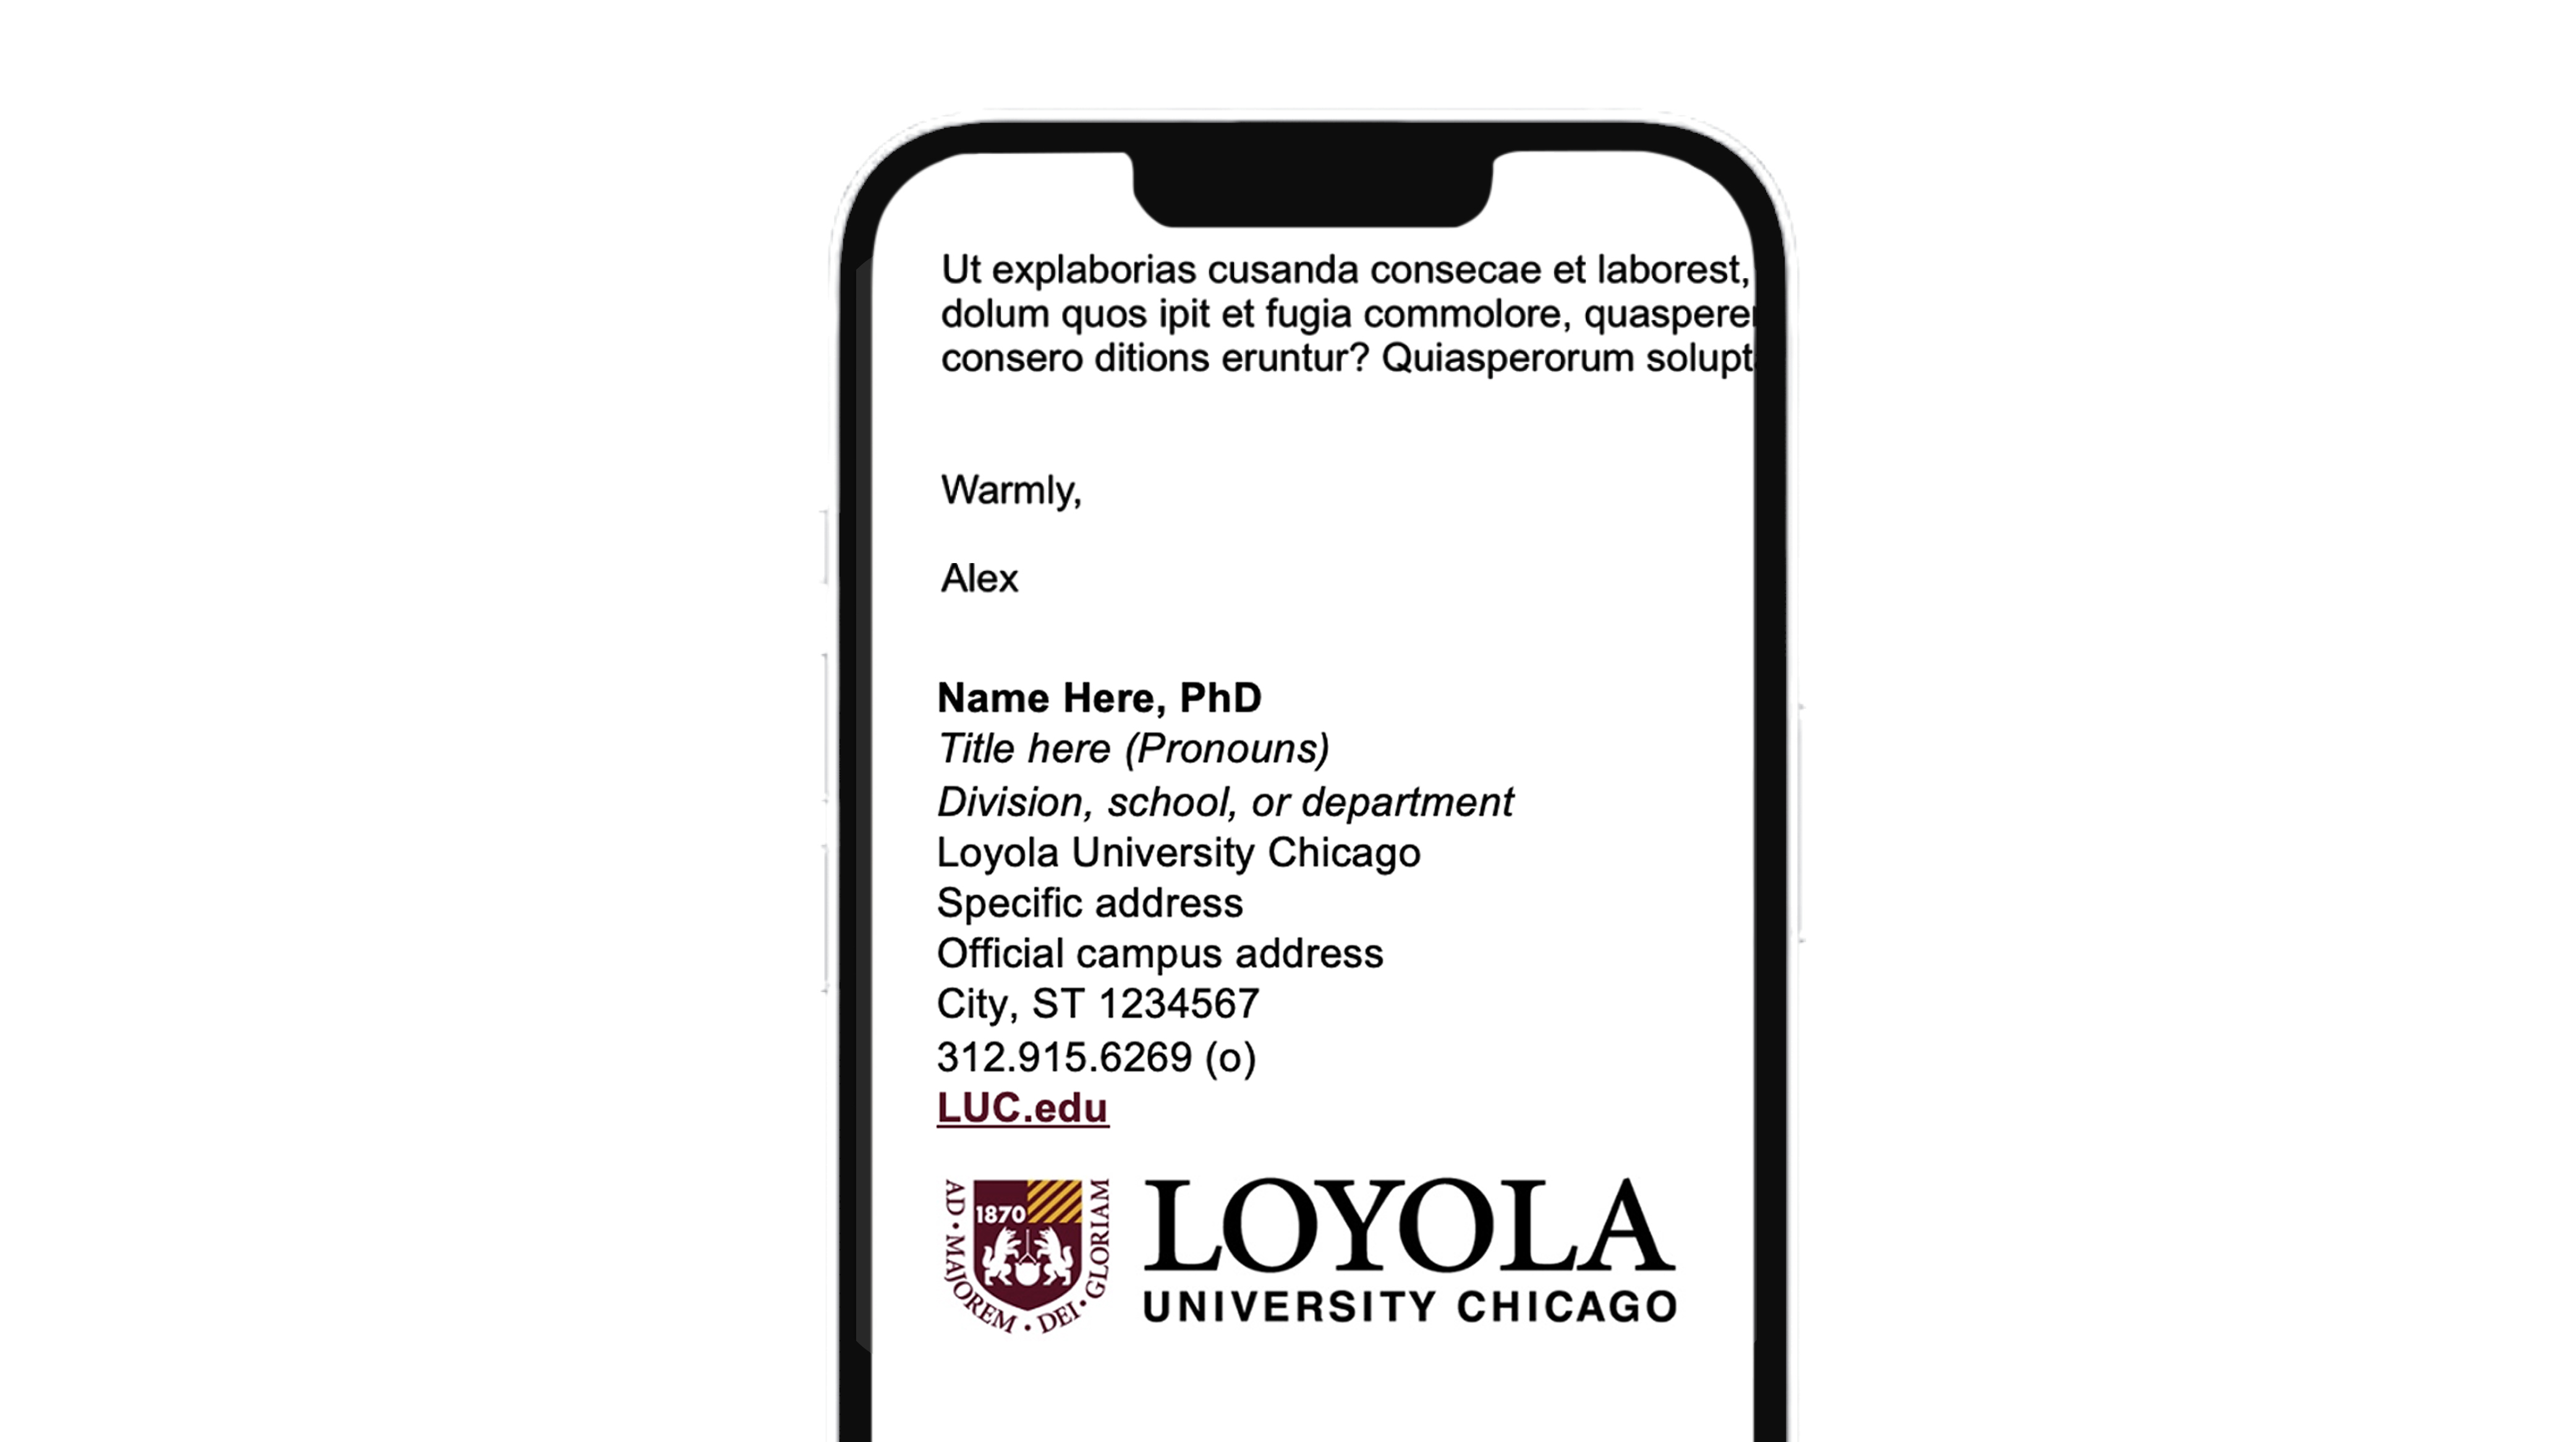 Graphic representation of a Loyola University Chicago email signature on a mobile phone, using placeholder copy.